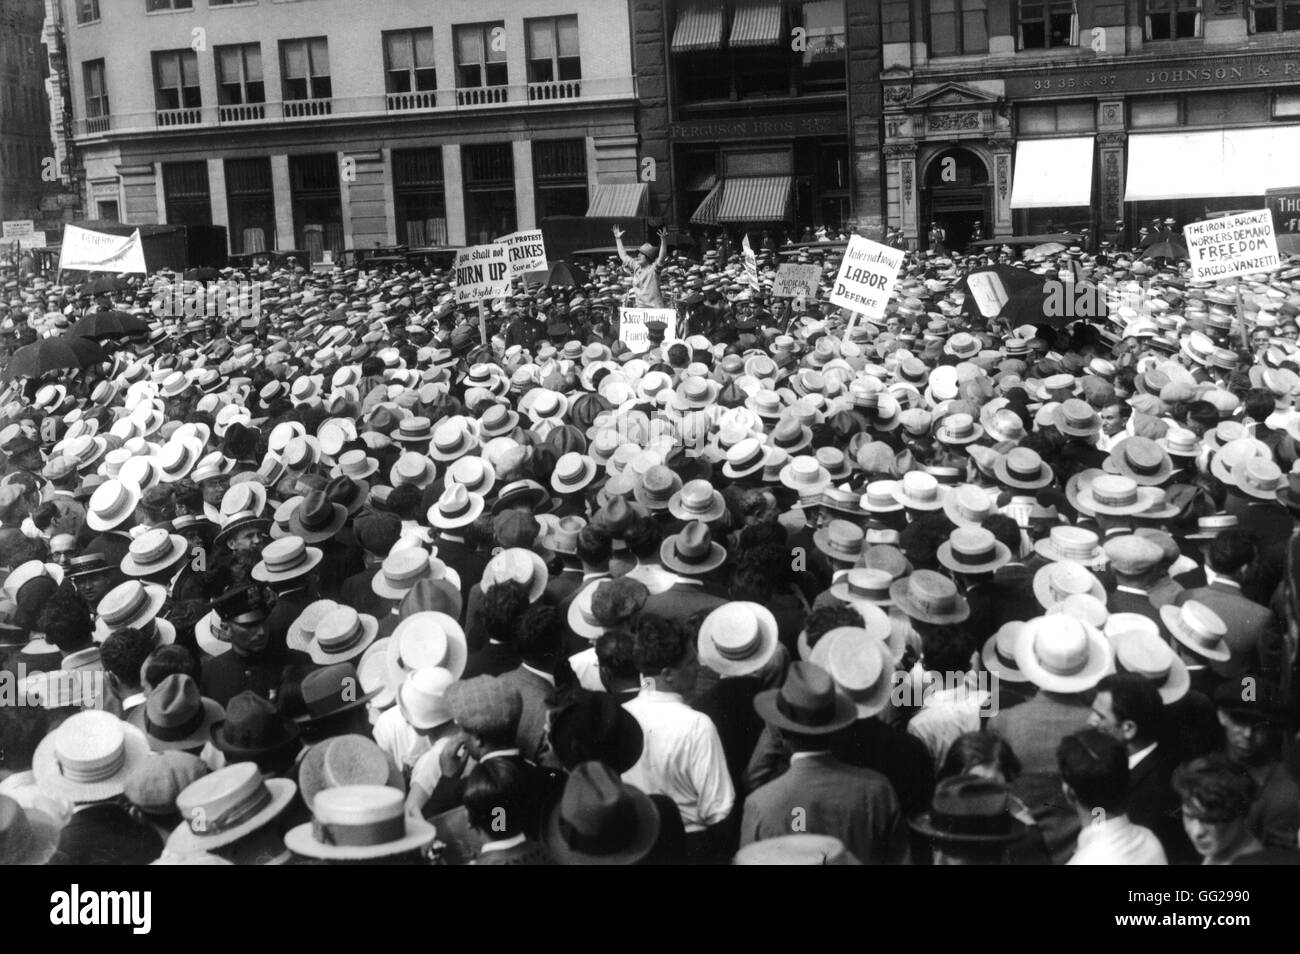 New York. Demonstration against the execution of Sacco and Vanzetti (sentenced to death in 1920, executed in 1927). Miss E.G. Flynn is delivering a speech to the crowd at Union Square Around 1927 United States Washington. National archives Stock Photo